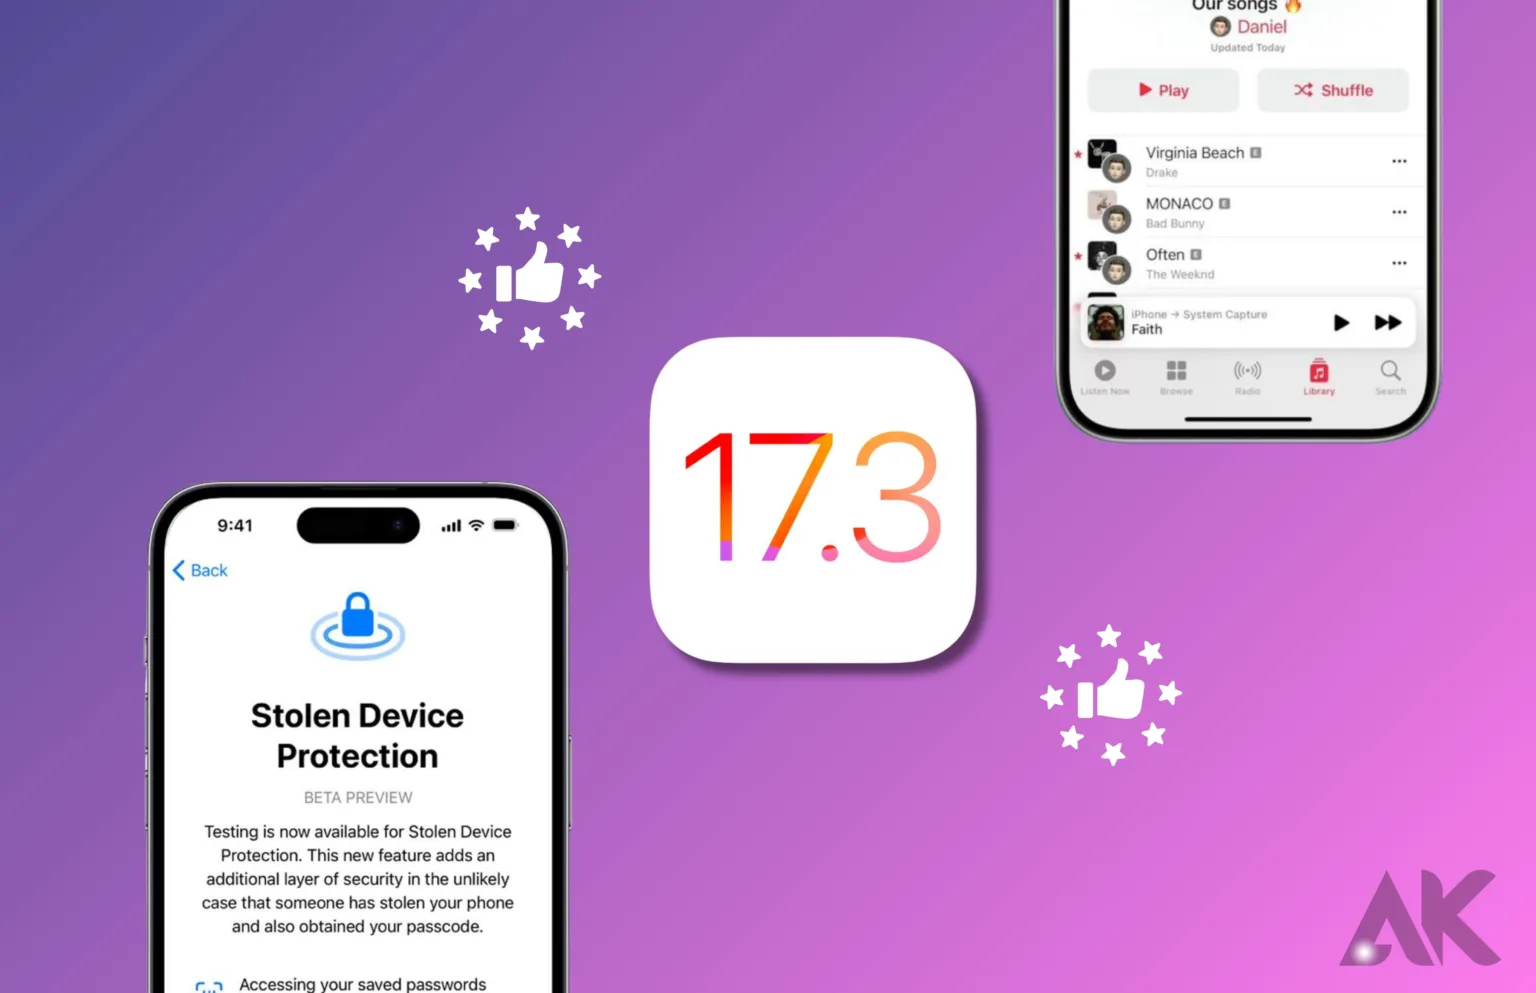 Honest iOS 17.3 Review: Should You Upgrade or Stay Put?